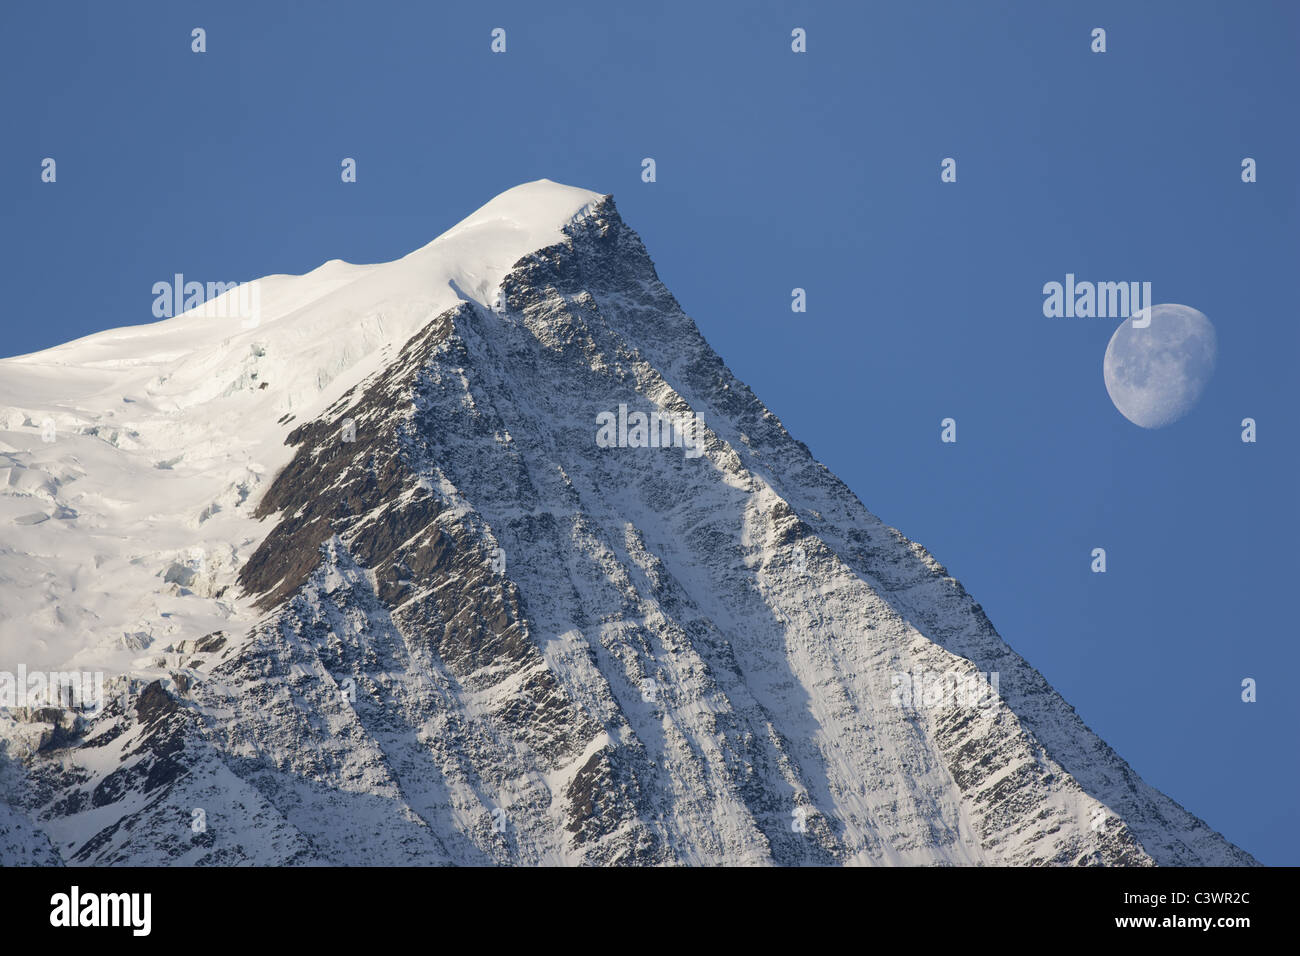 Aiguille du Gouter; a 3786-meter-high peak in the Mont-Blanc massif. Scene shot with a 400mm lens (moon not added). Chamonix, Haute-Savoie, France. Stock Photo